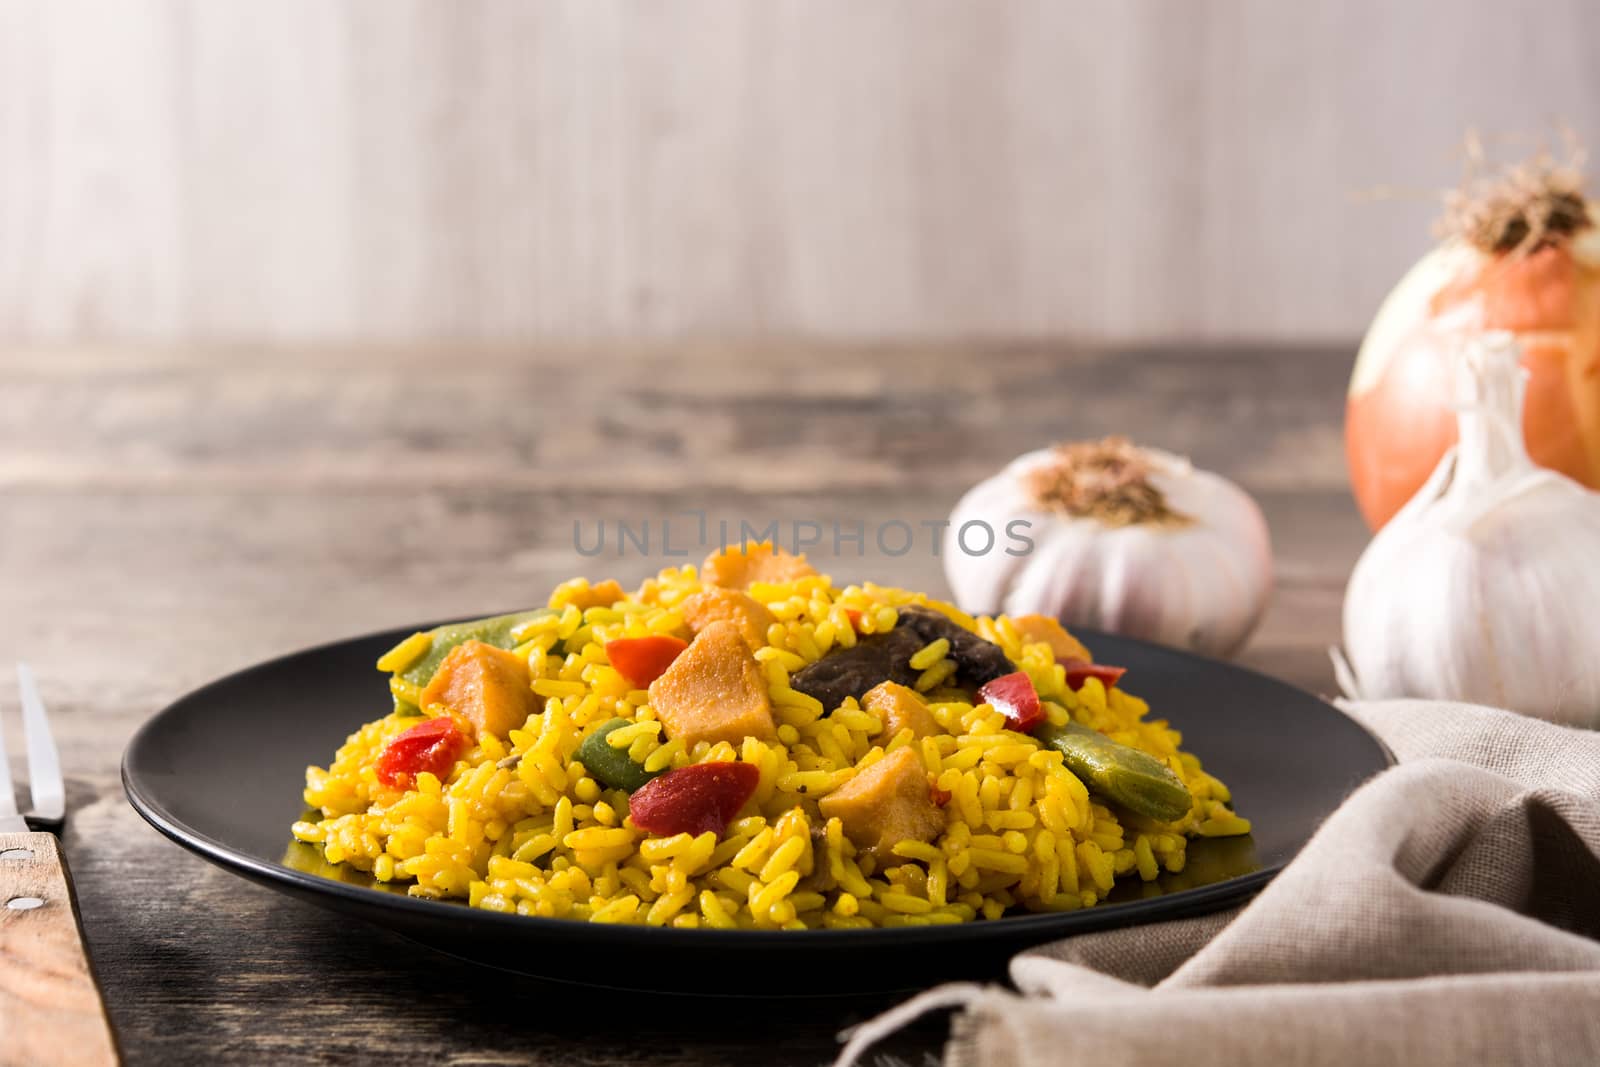 Fried rice with chicken and vegetables on black plate on wooden table